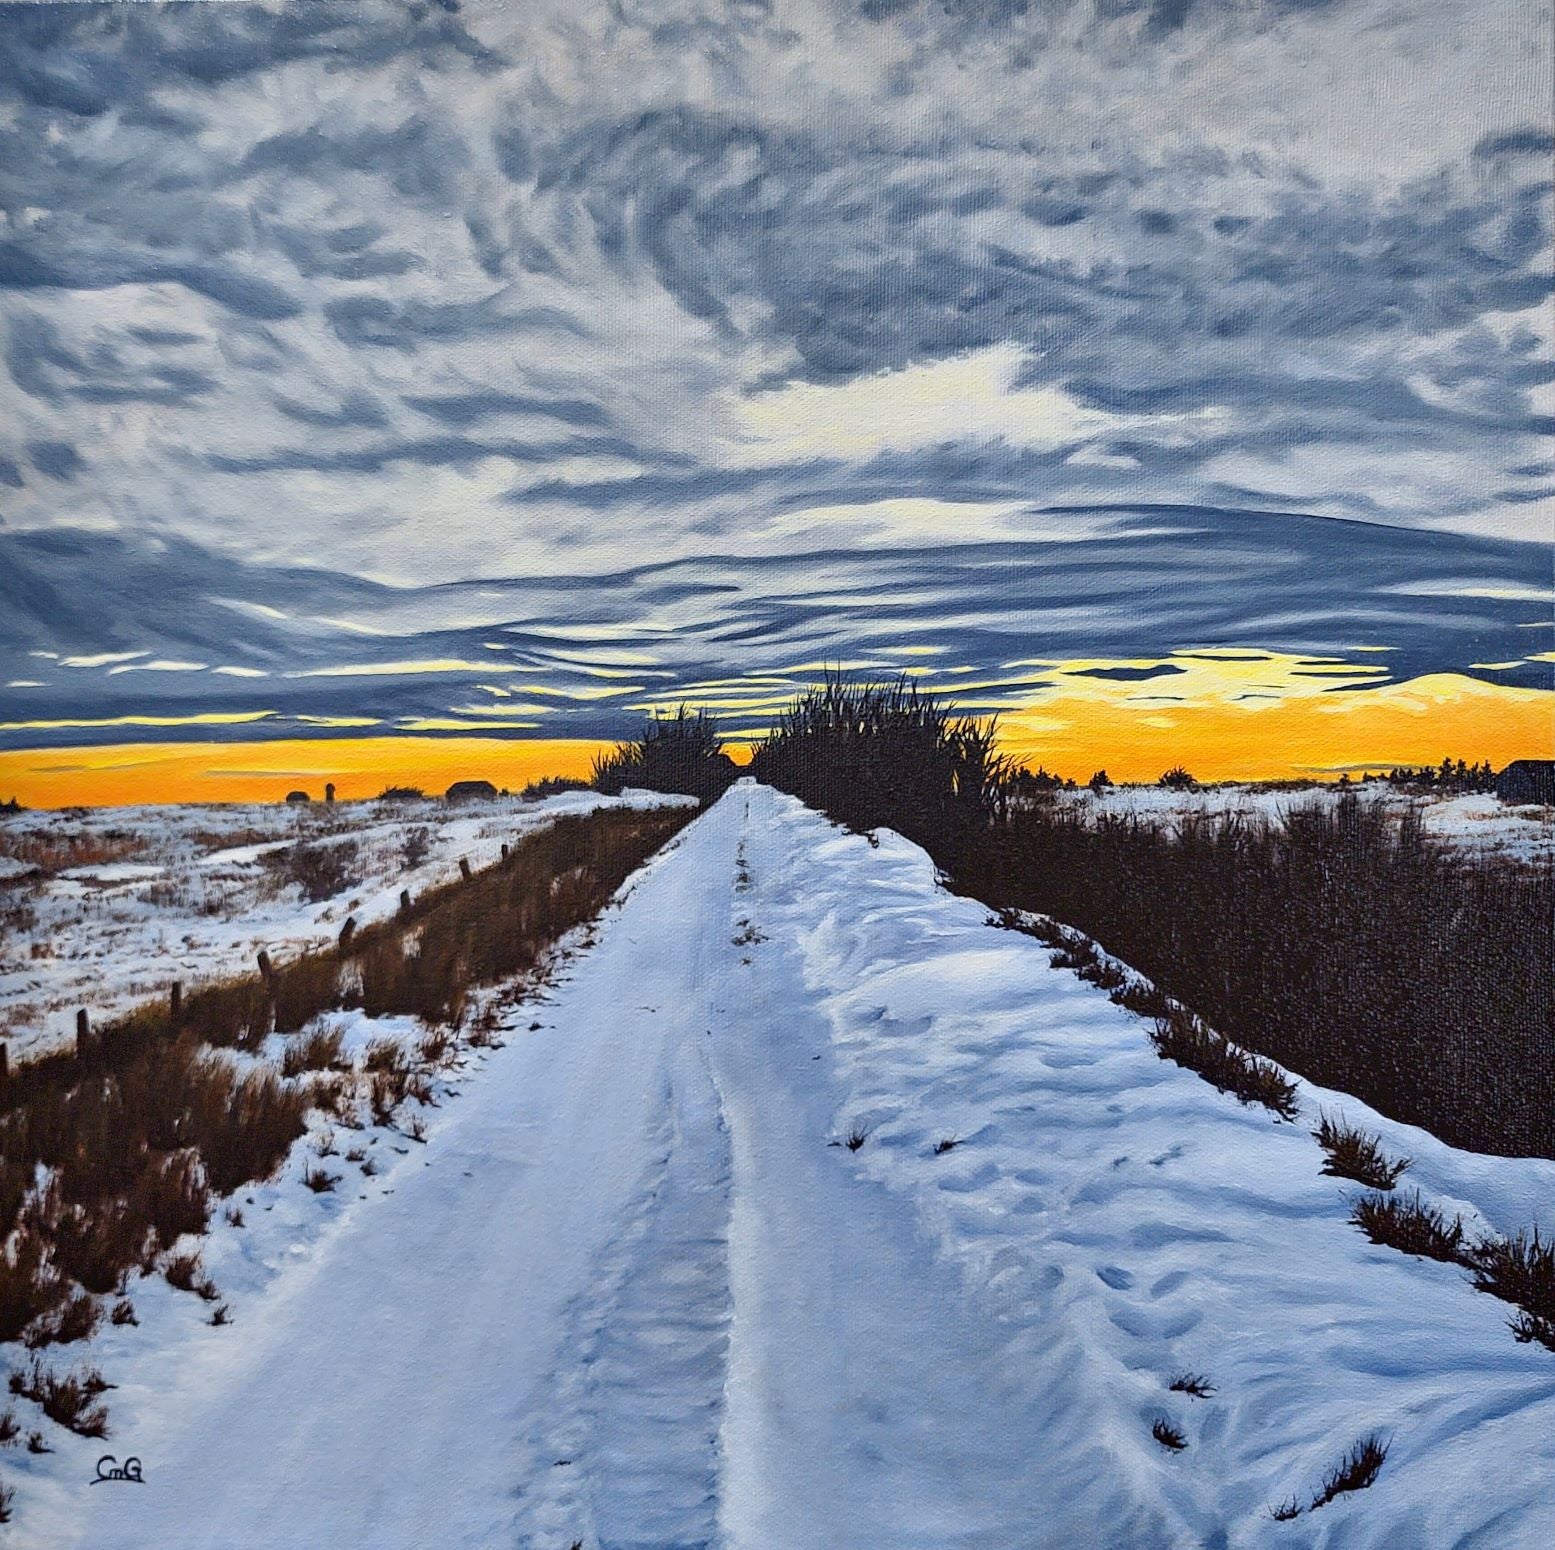 Oil on Canvas landscape painting of a winter rural road with an orange sunset